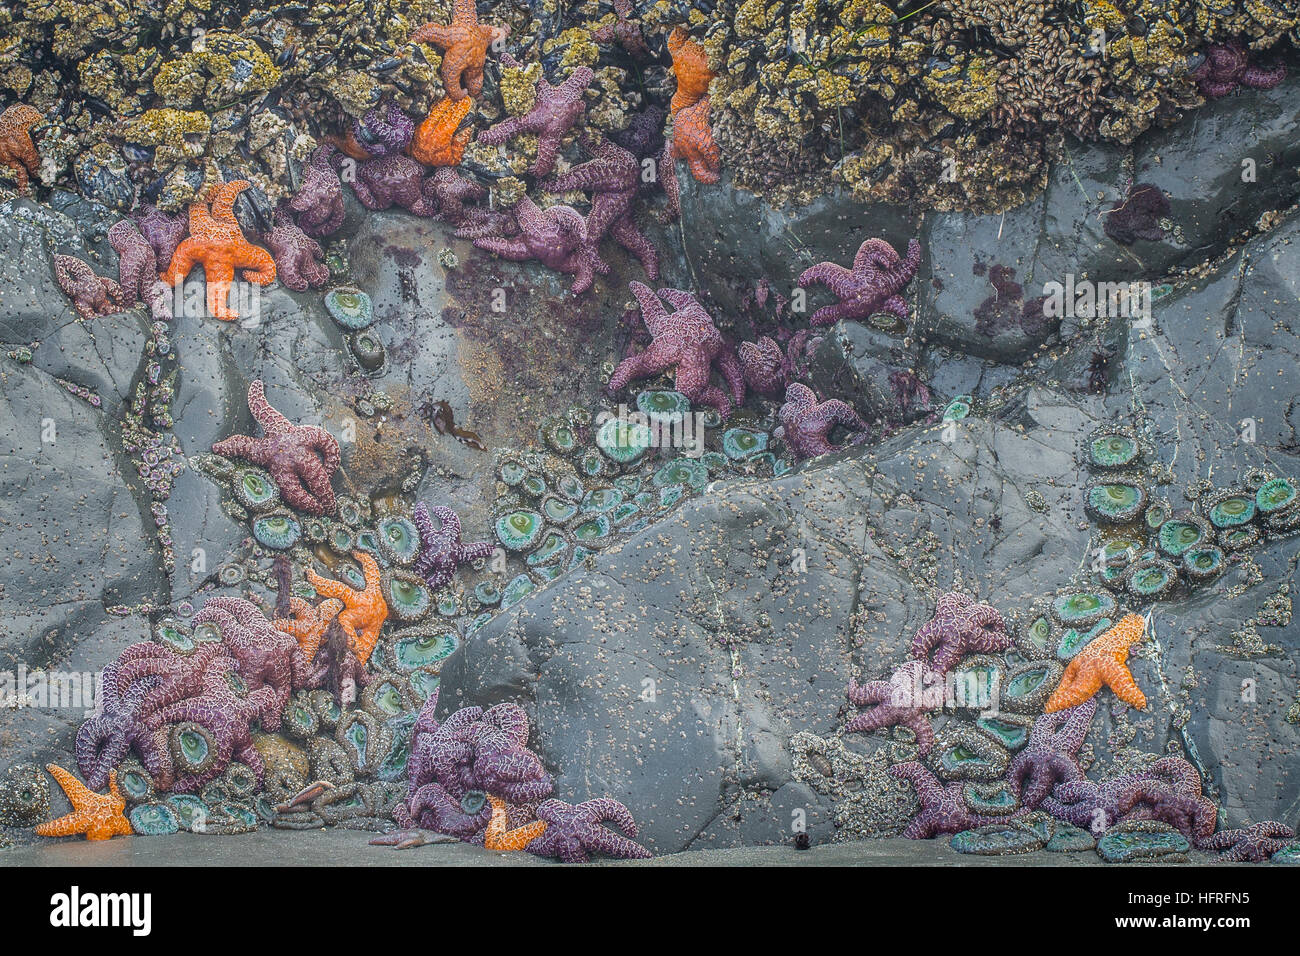 Where sea stars are abundant, mussels (among their favorite prey) are less numerous. Segregation of the two taxa in this picture is quite apparent. Stock Photo